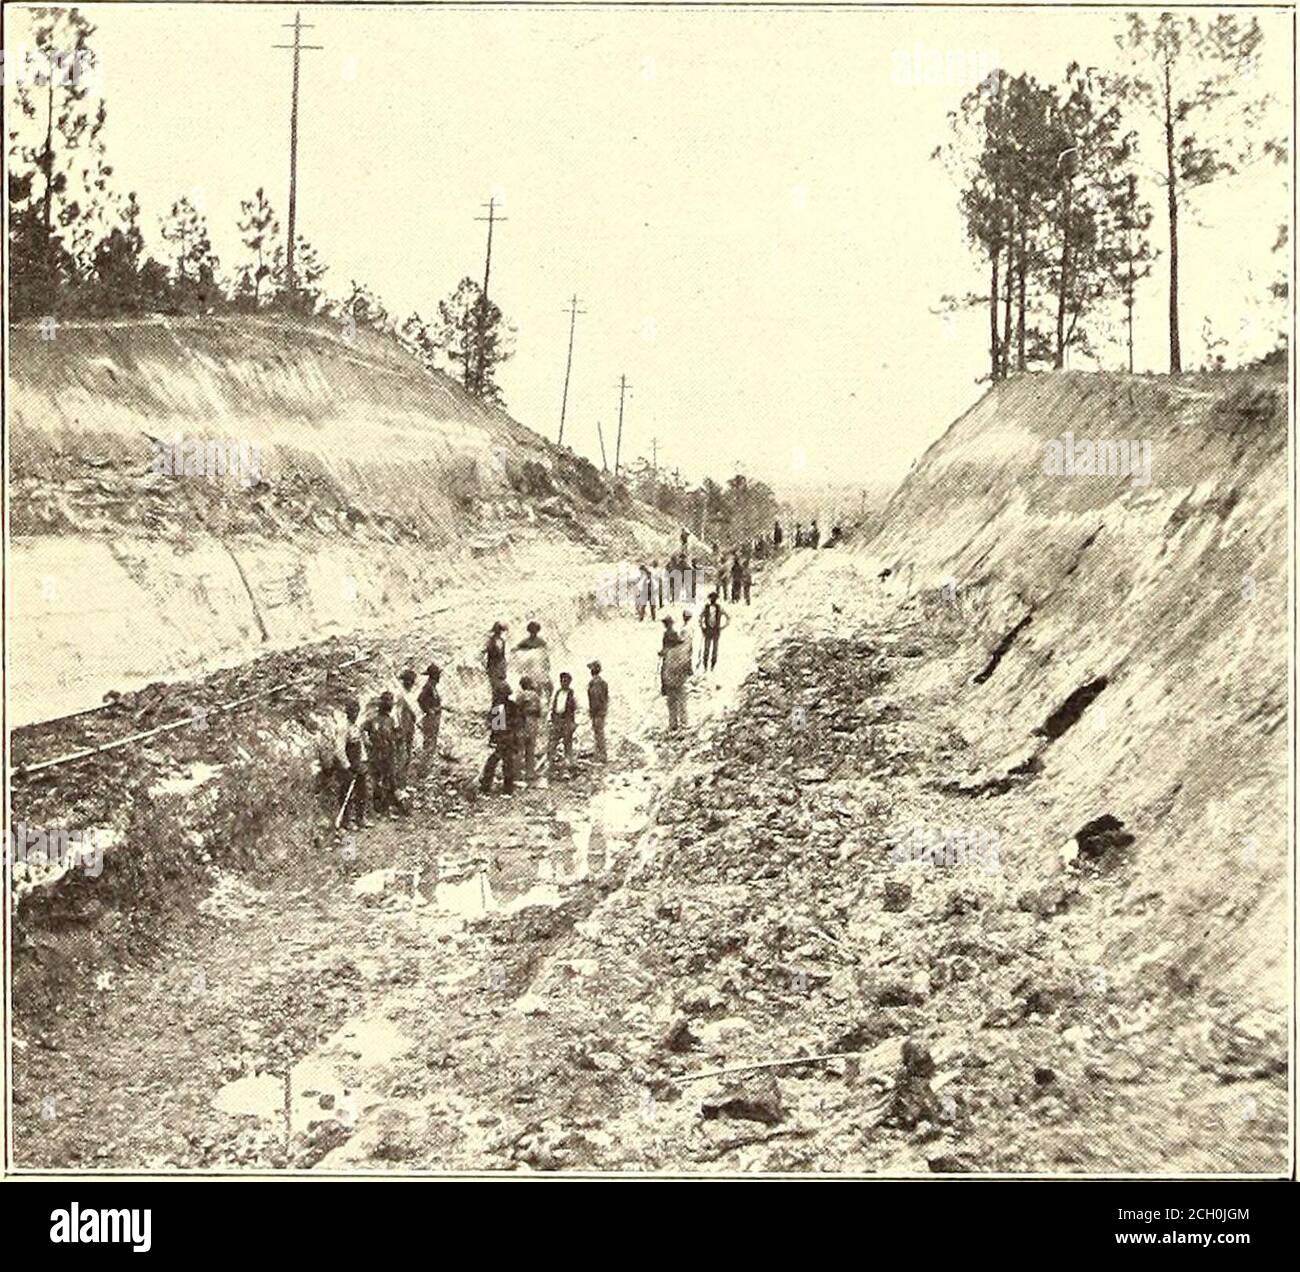 . The Street railway journal . the country and the difficulties encountered in laying out andbuilding the road. The project was undertaken by the NorthAugusta Electric & Improvement Company, a syndicate en-gaged in the development of the country through which the linepasses. This corporation owns 7000 acres of land in SouthCarolina, just across the Savannah River from Augusta, and itis also interested in many of the industrial enterprises of thevicinity. The natural scenery has attracted many wealthyNorthern people to this section, and the presence of beautifullong leaf yellow pines in abundan Stock Photo